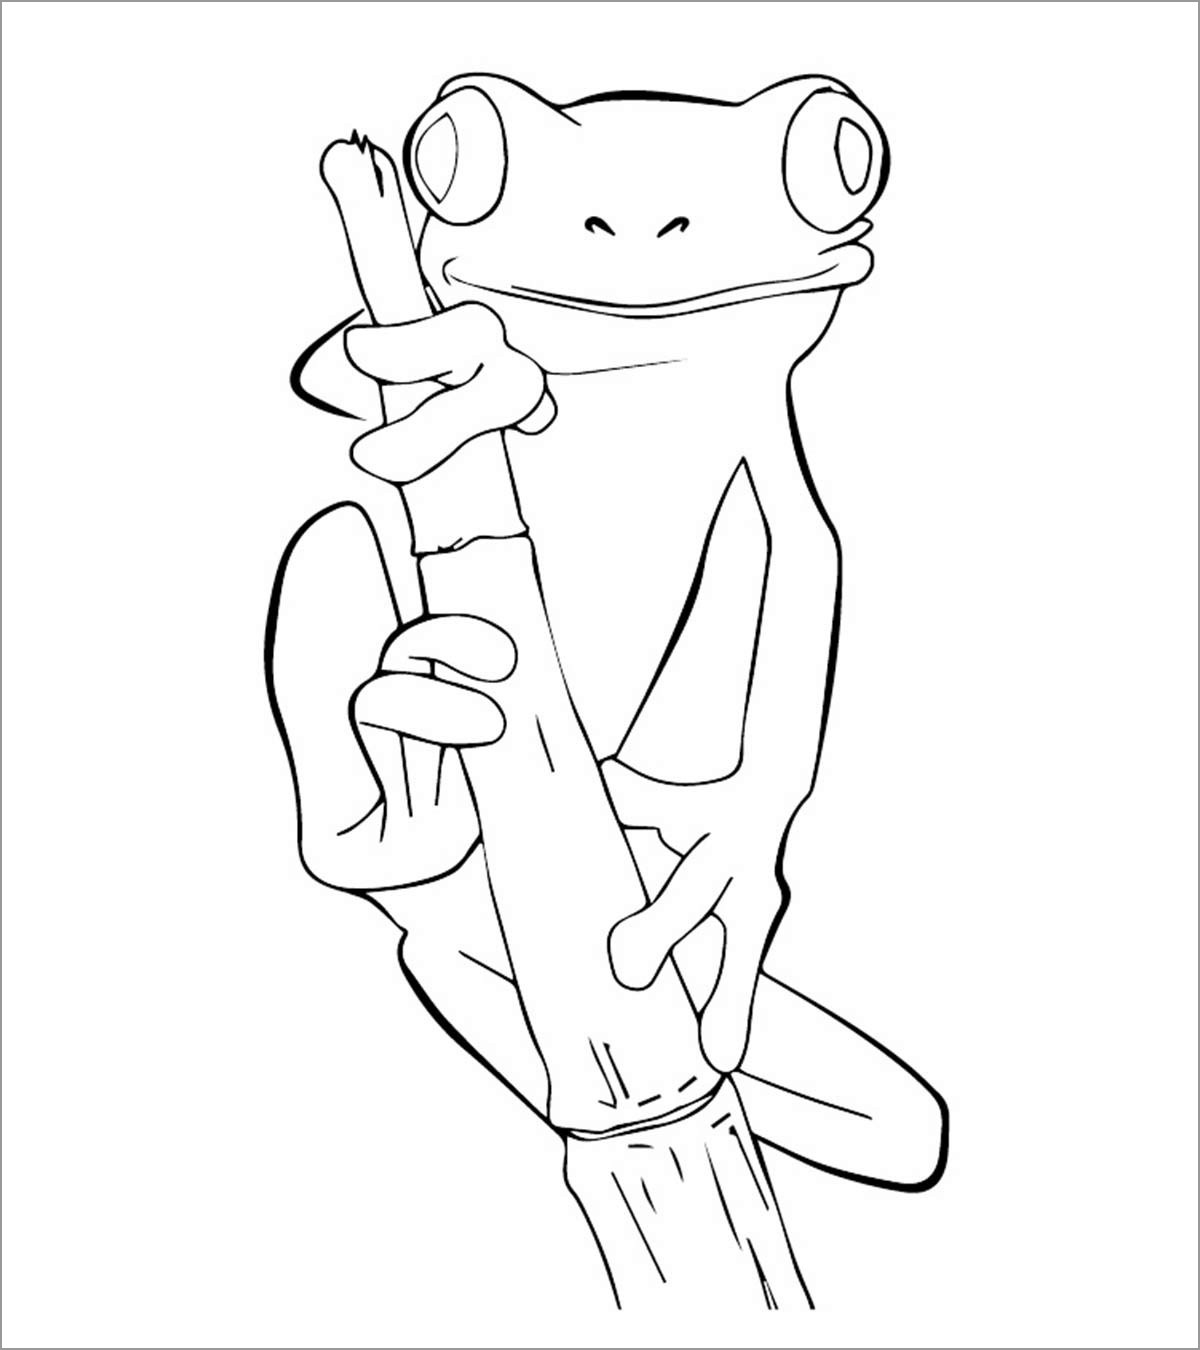 Printable toad Coloring Page